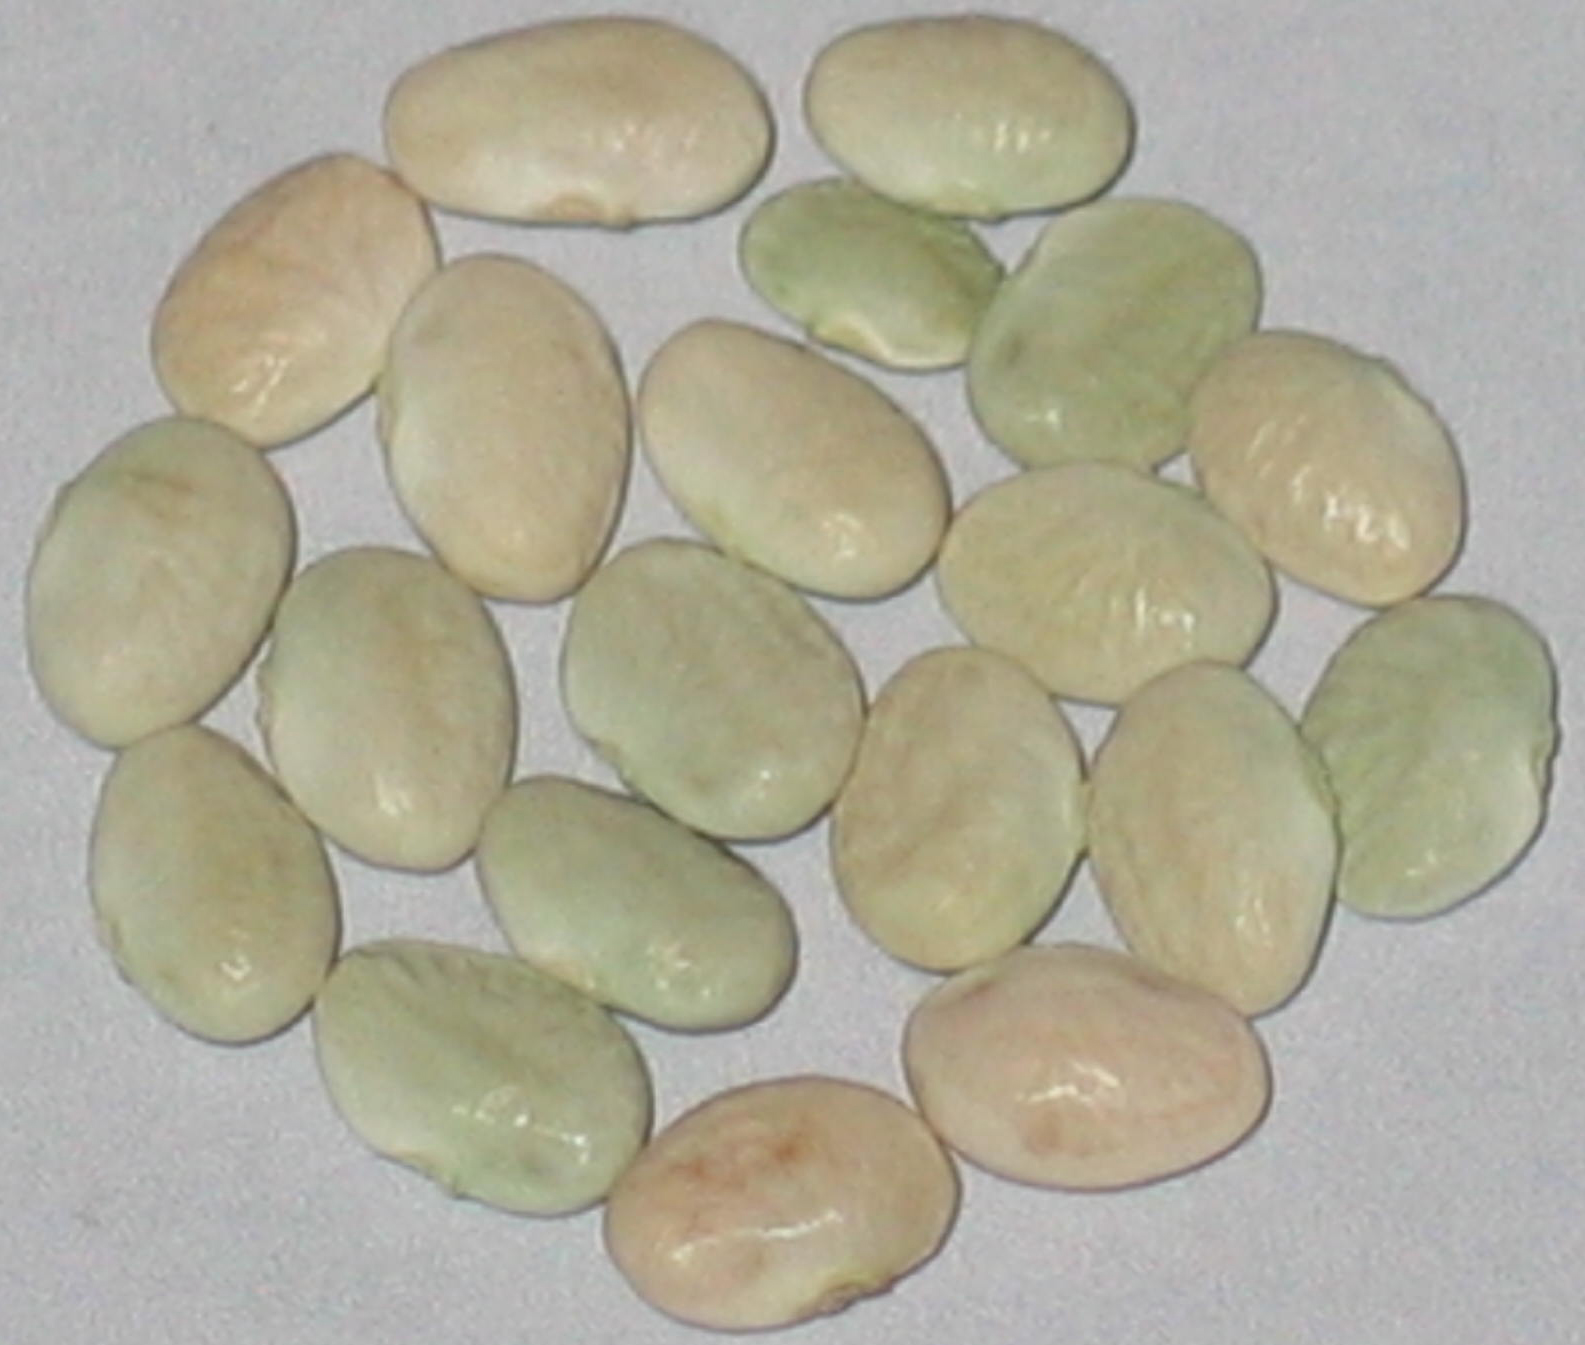 image of Tierra White Tepary beans